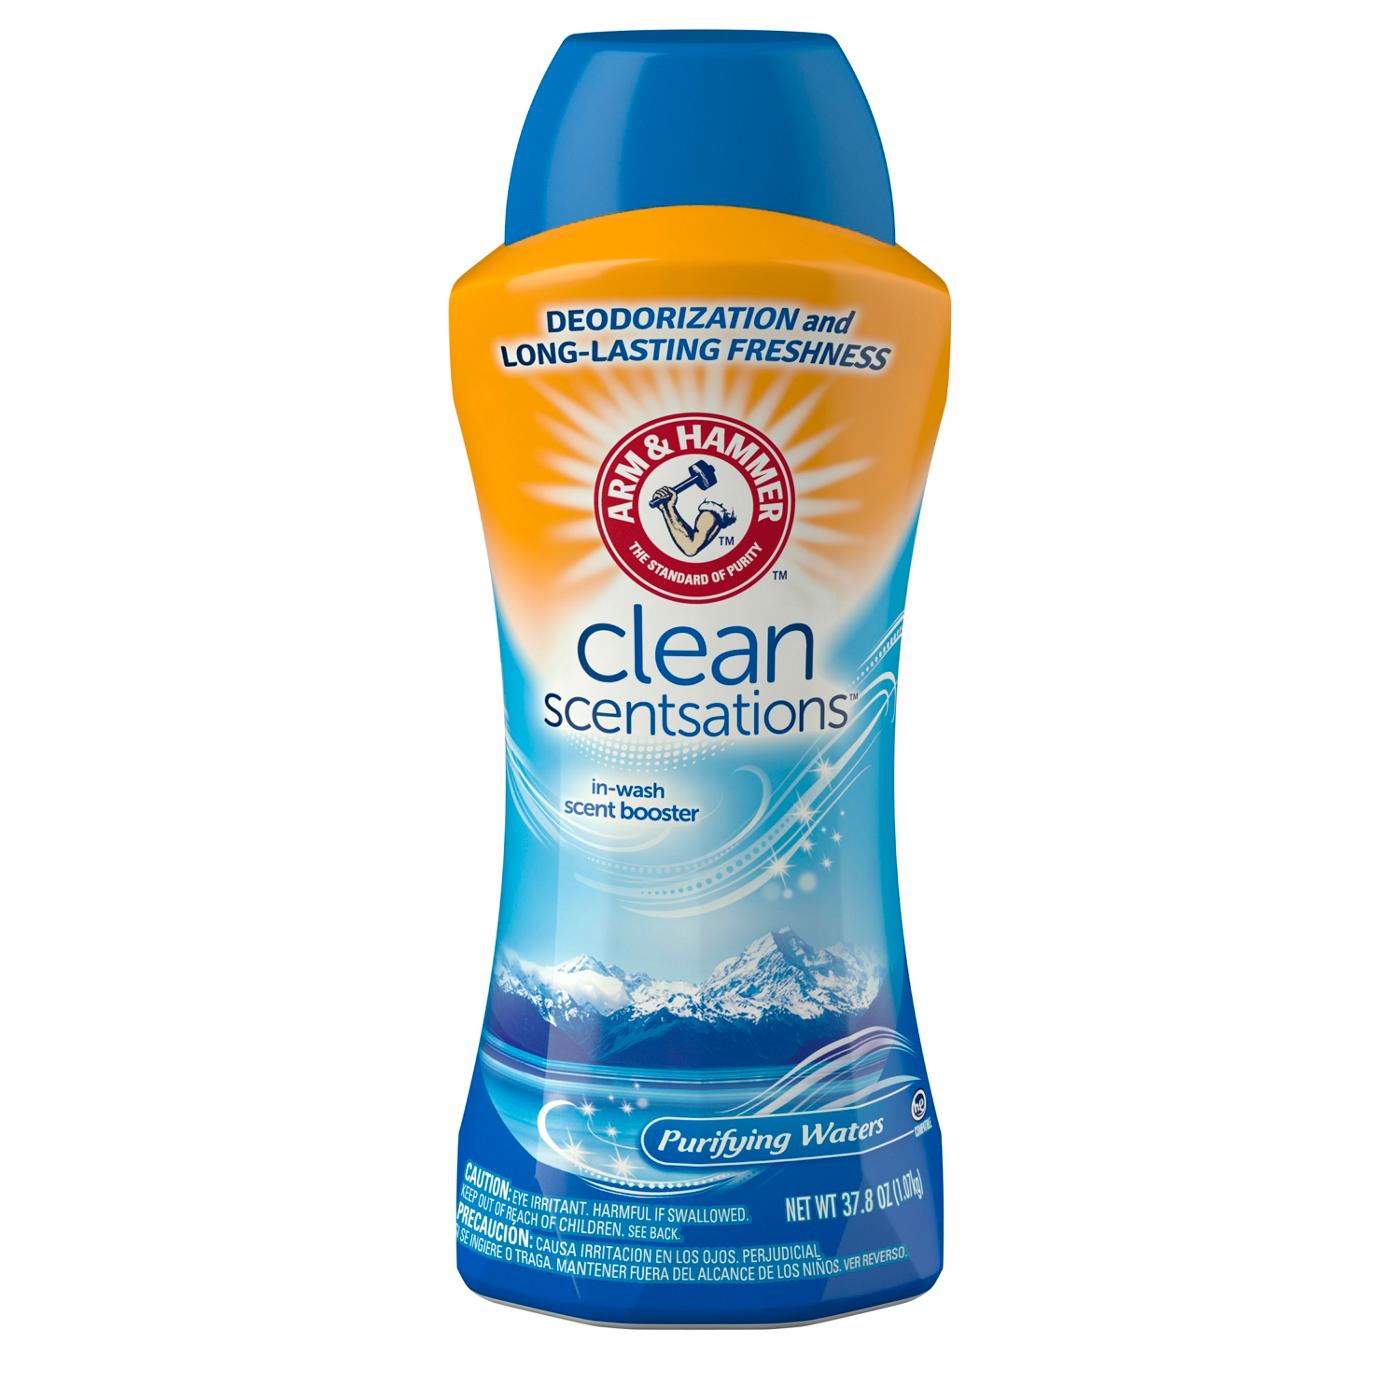 Arm & Hammer Clean Scentsations In-Wash Scent Booster - Purifying Waters; image 1 of 2